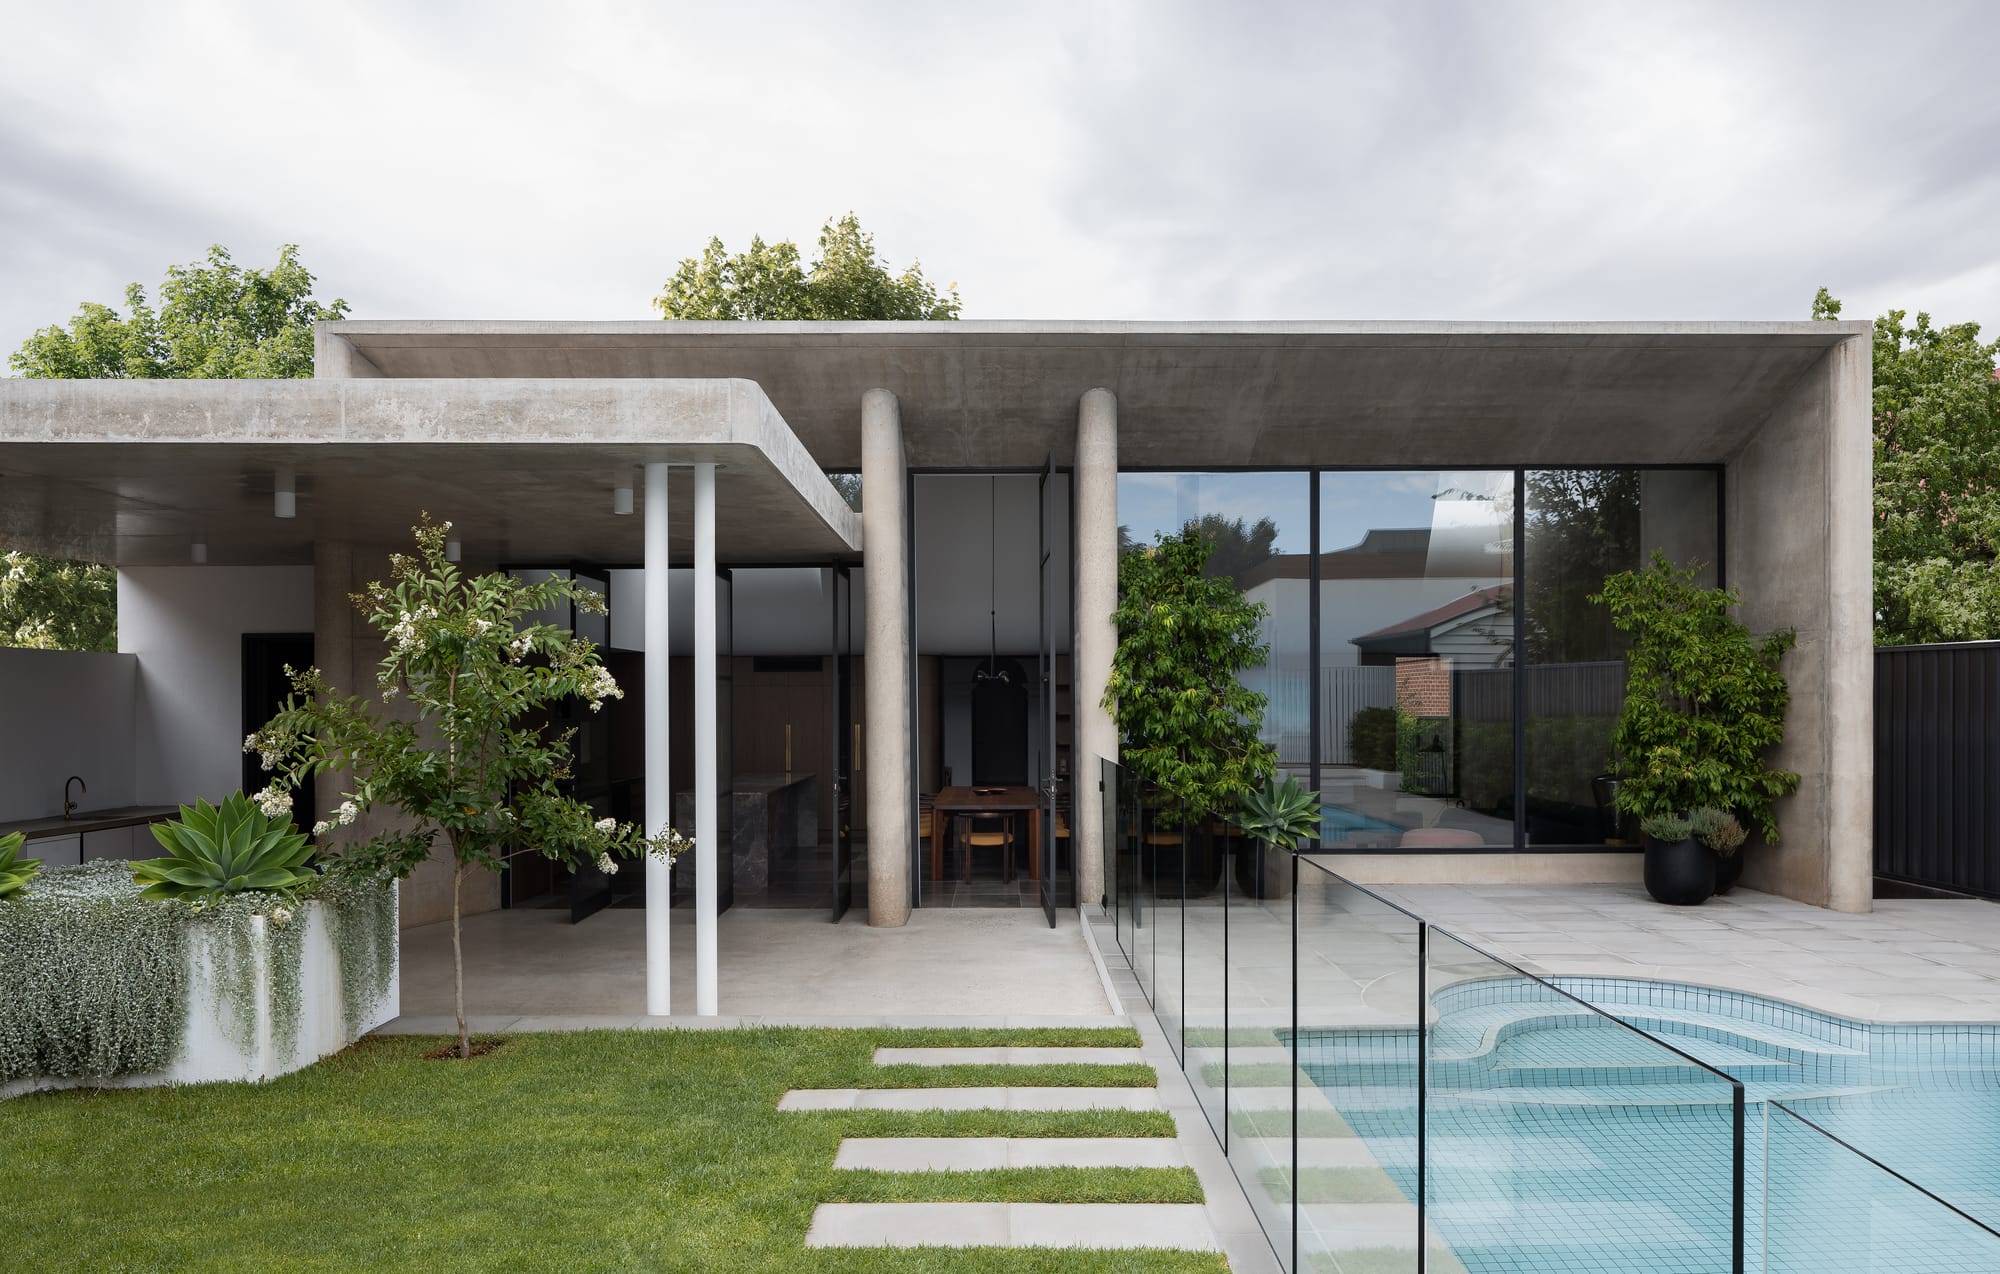 Rose Park by studio gram. Photography by Timothy Ross. Rear facade of residential home constructed of concrete. Green grass with pavers. Tiled pool with glass fence to right. 